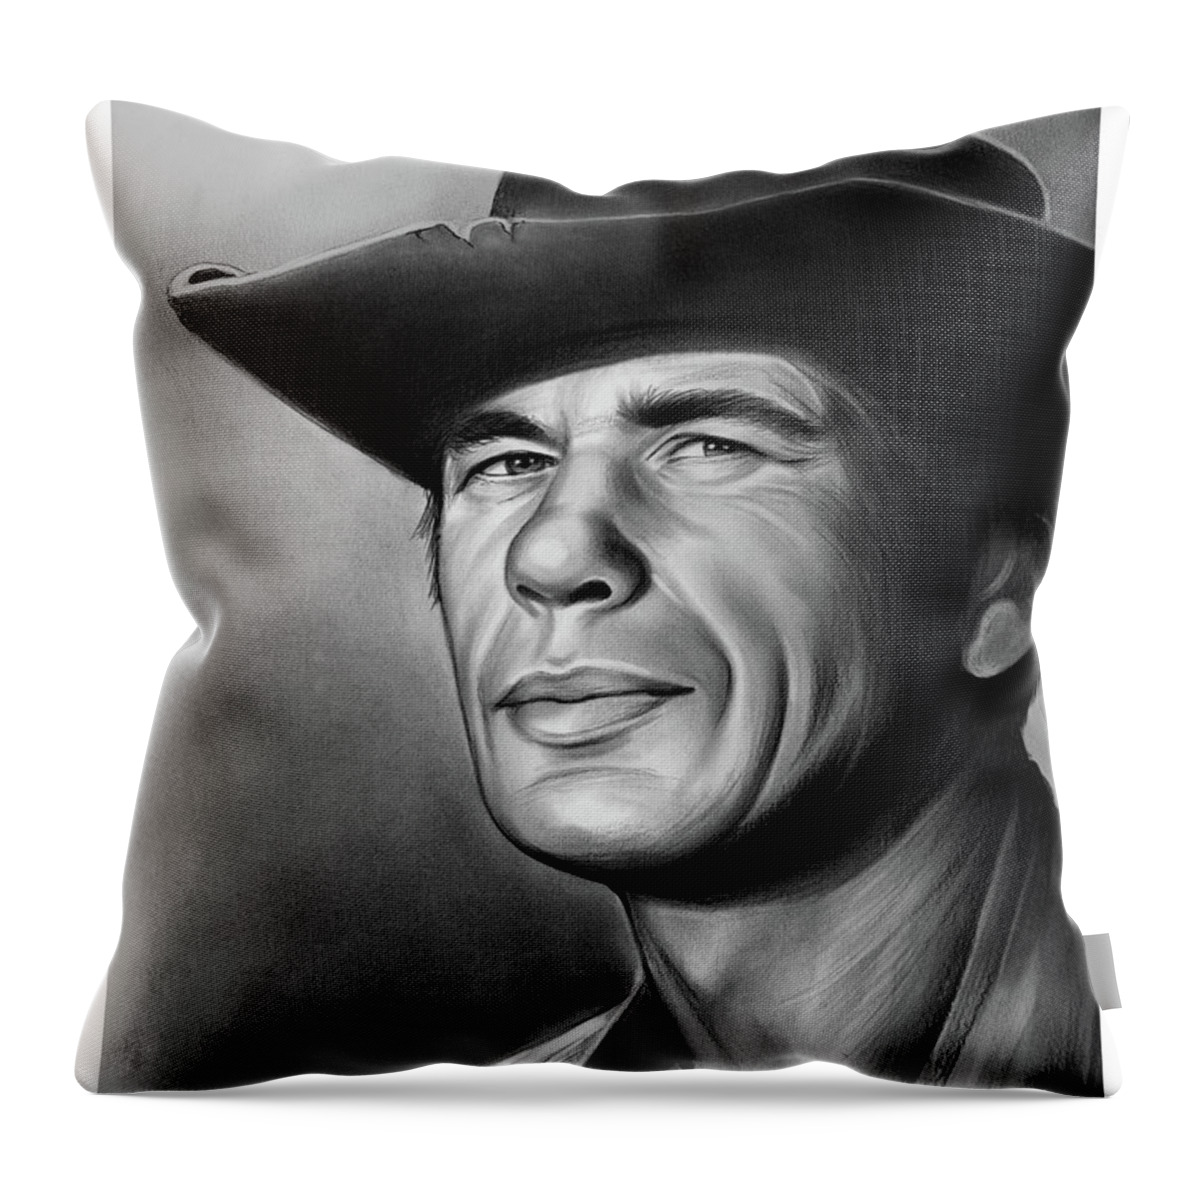 Charles Bronson Throw Pillow featuring the drawing Charles Bronson by Greg Joens